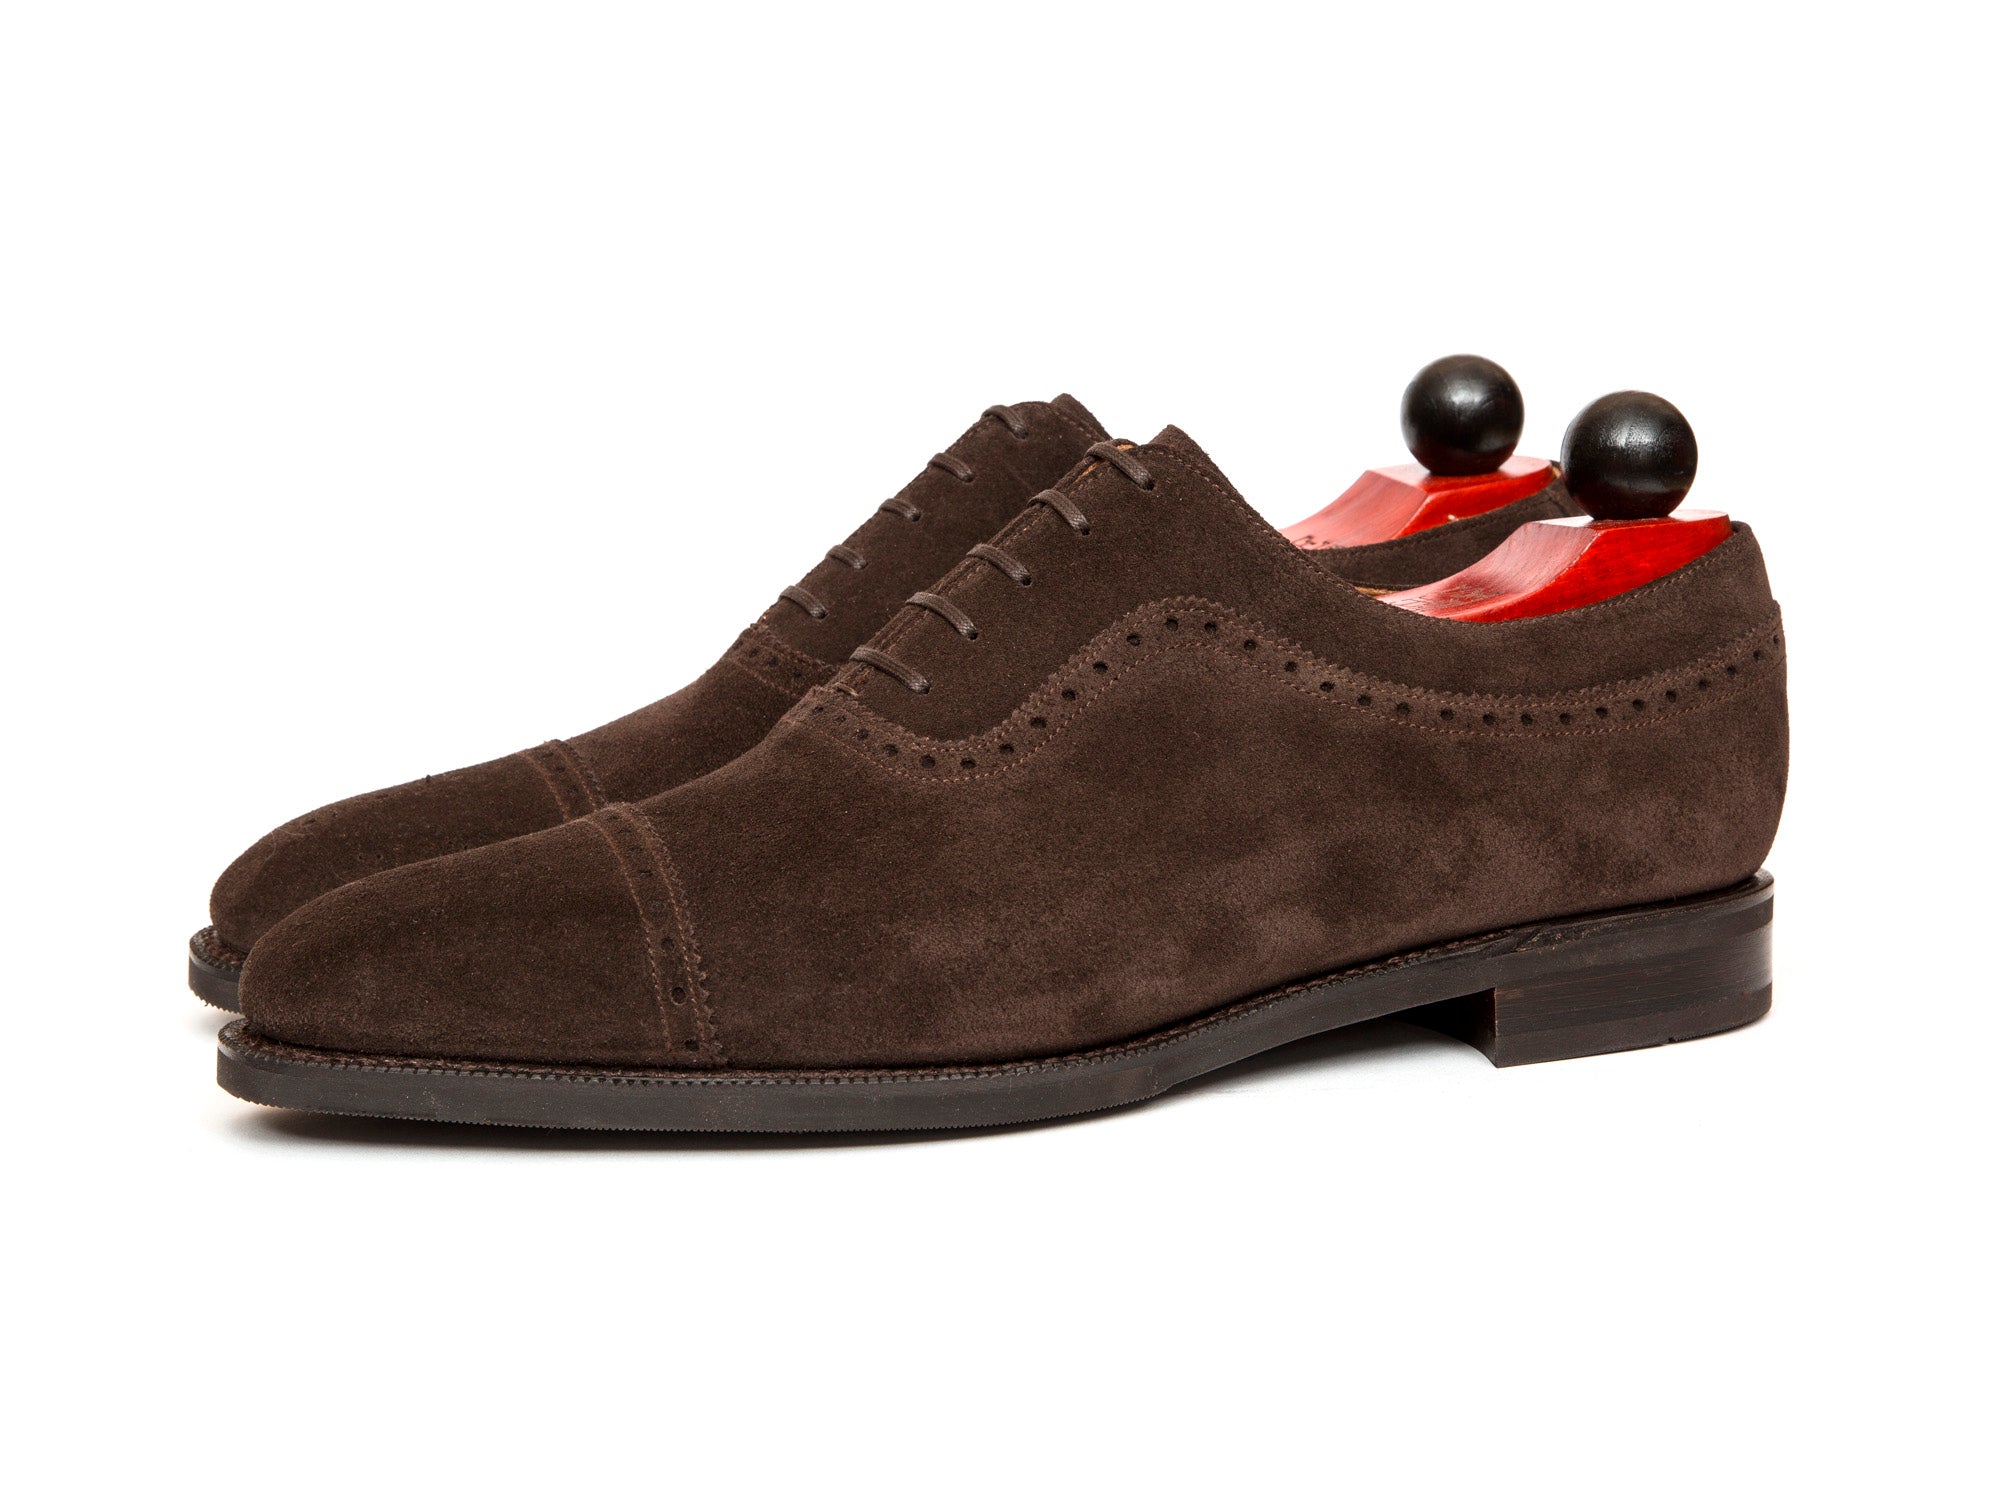 Riviera - MTO - Bitter Chocolate Suede - MGF Last - City Rubber Sole